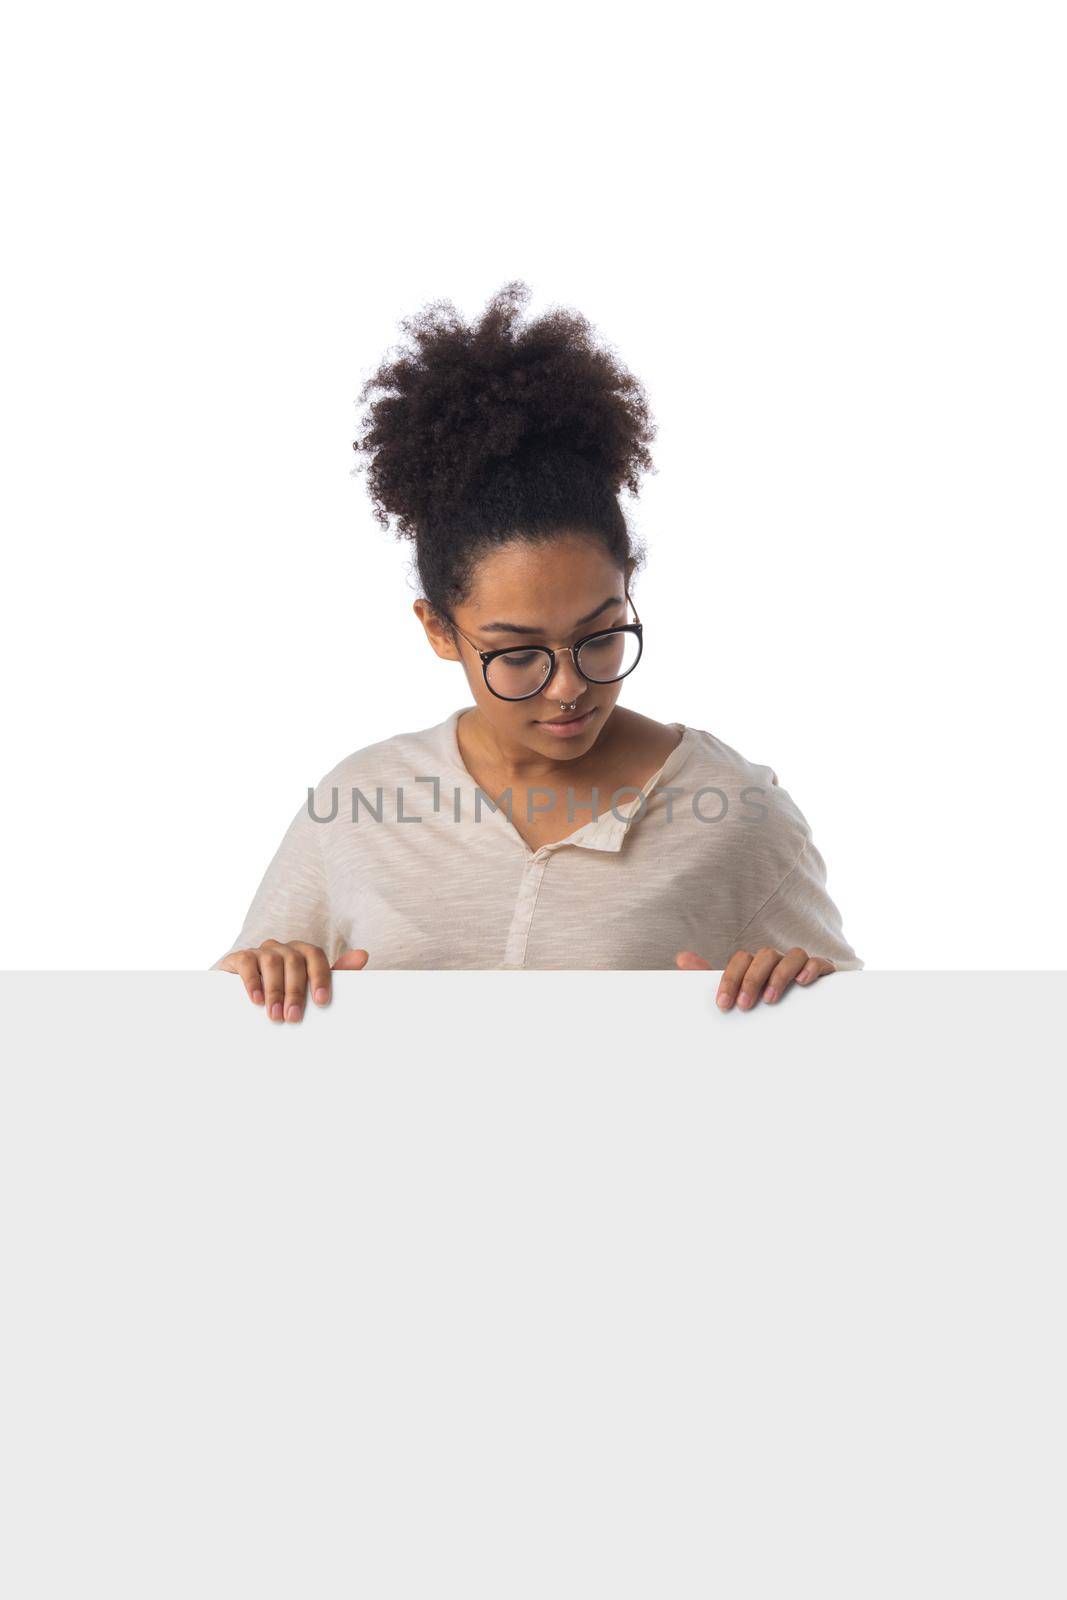 Black woman holding billboard isolated on white background